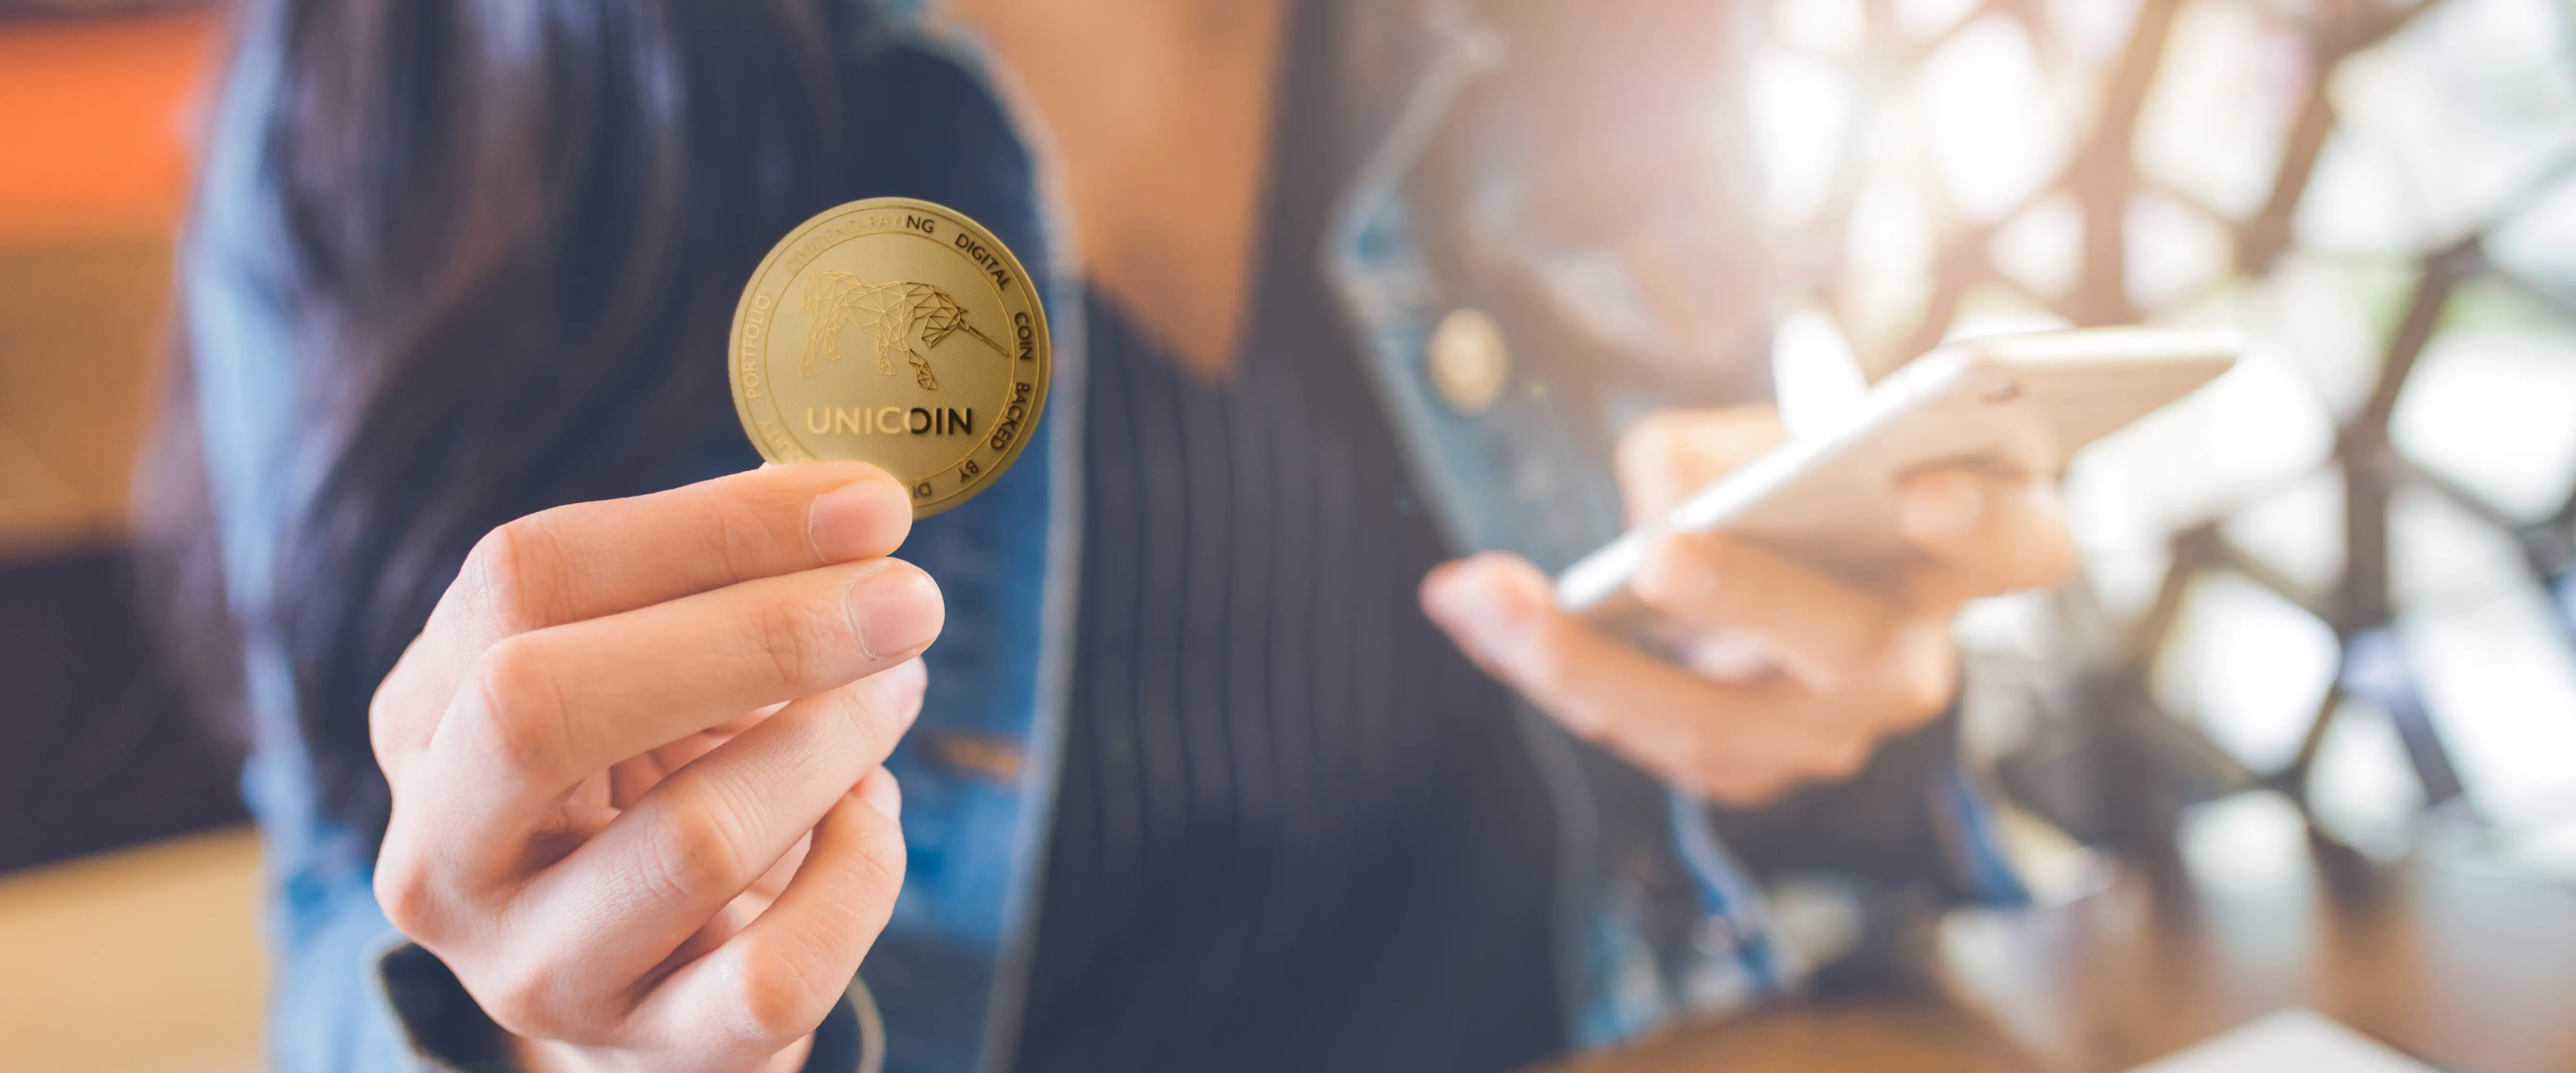 Unicoin is Offered as the Perfect Gift for This Holiday Season: Free, Valuable, and Unique